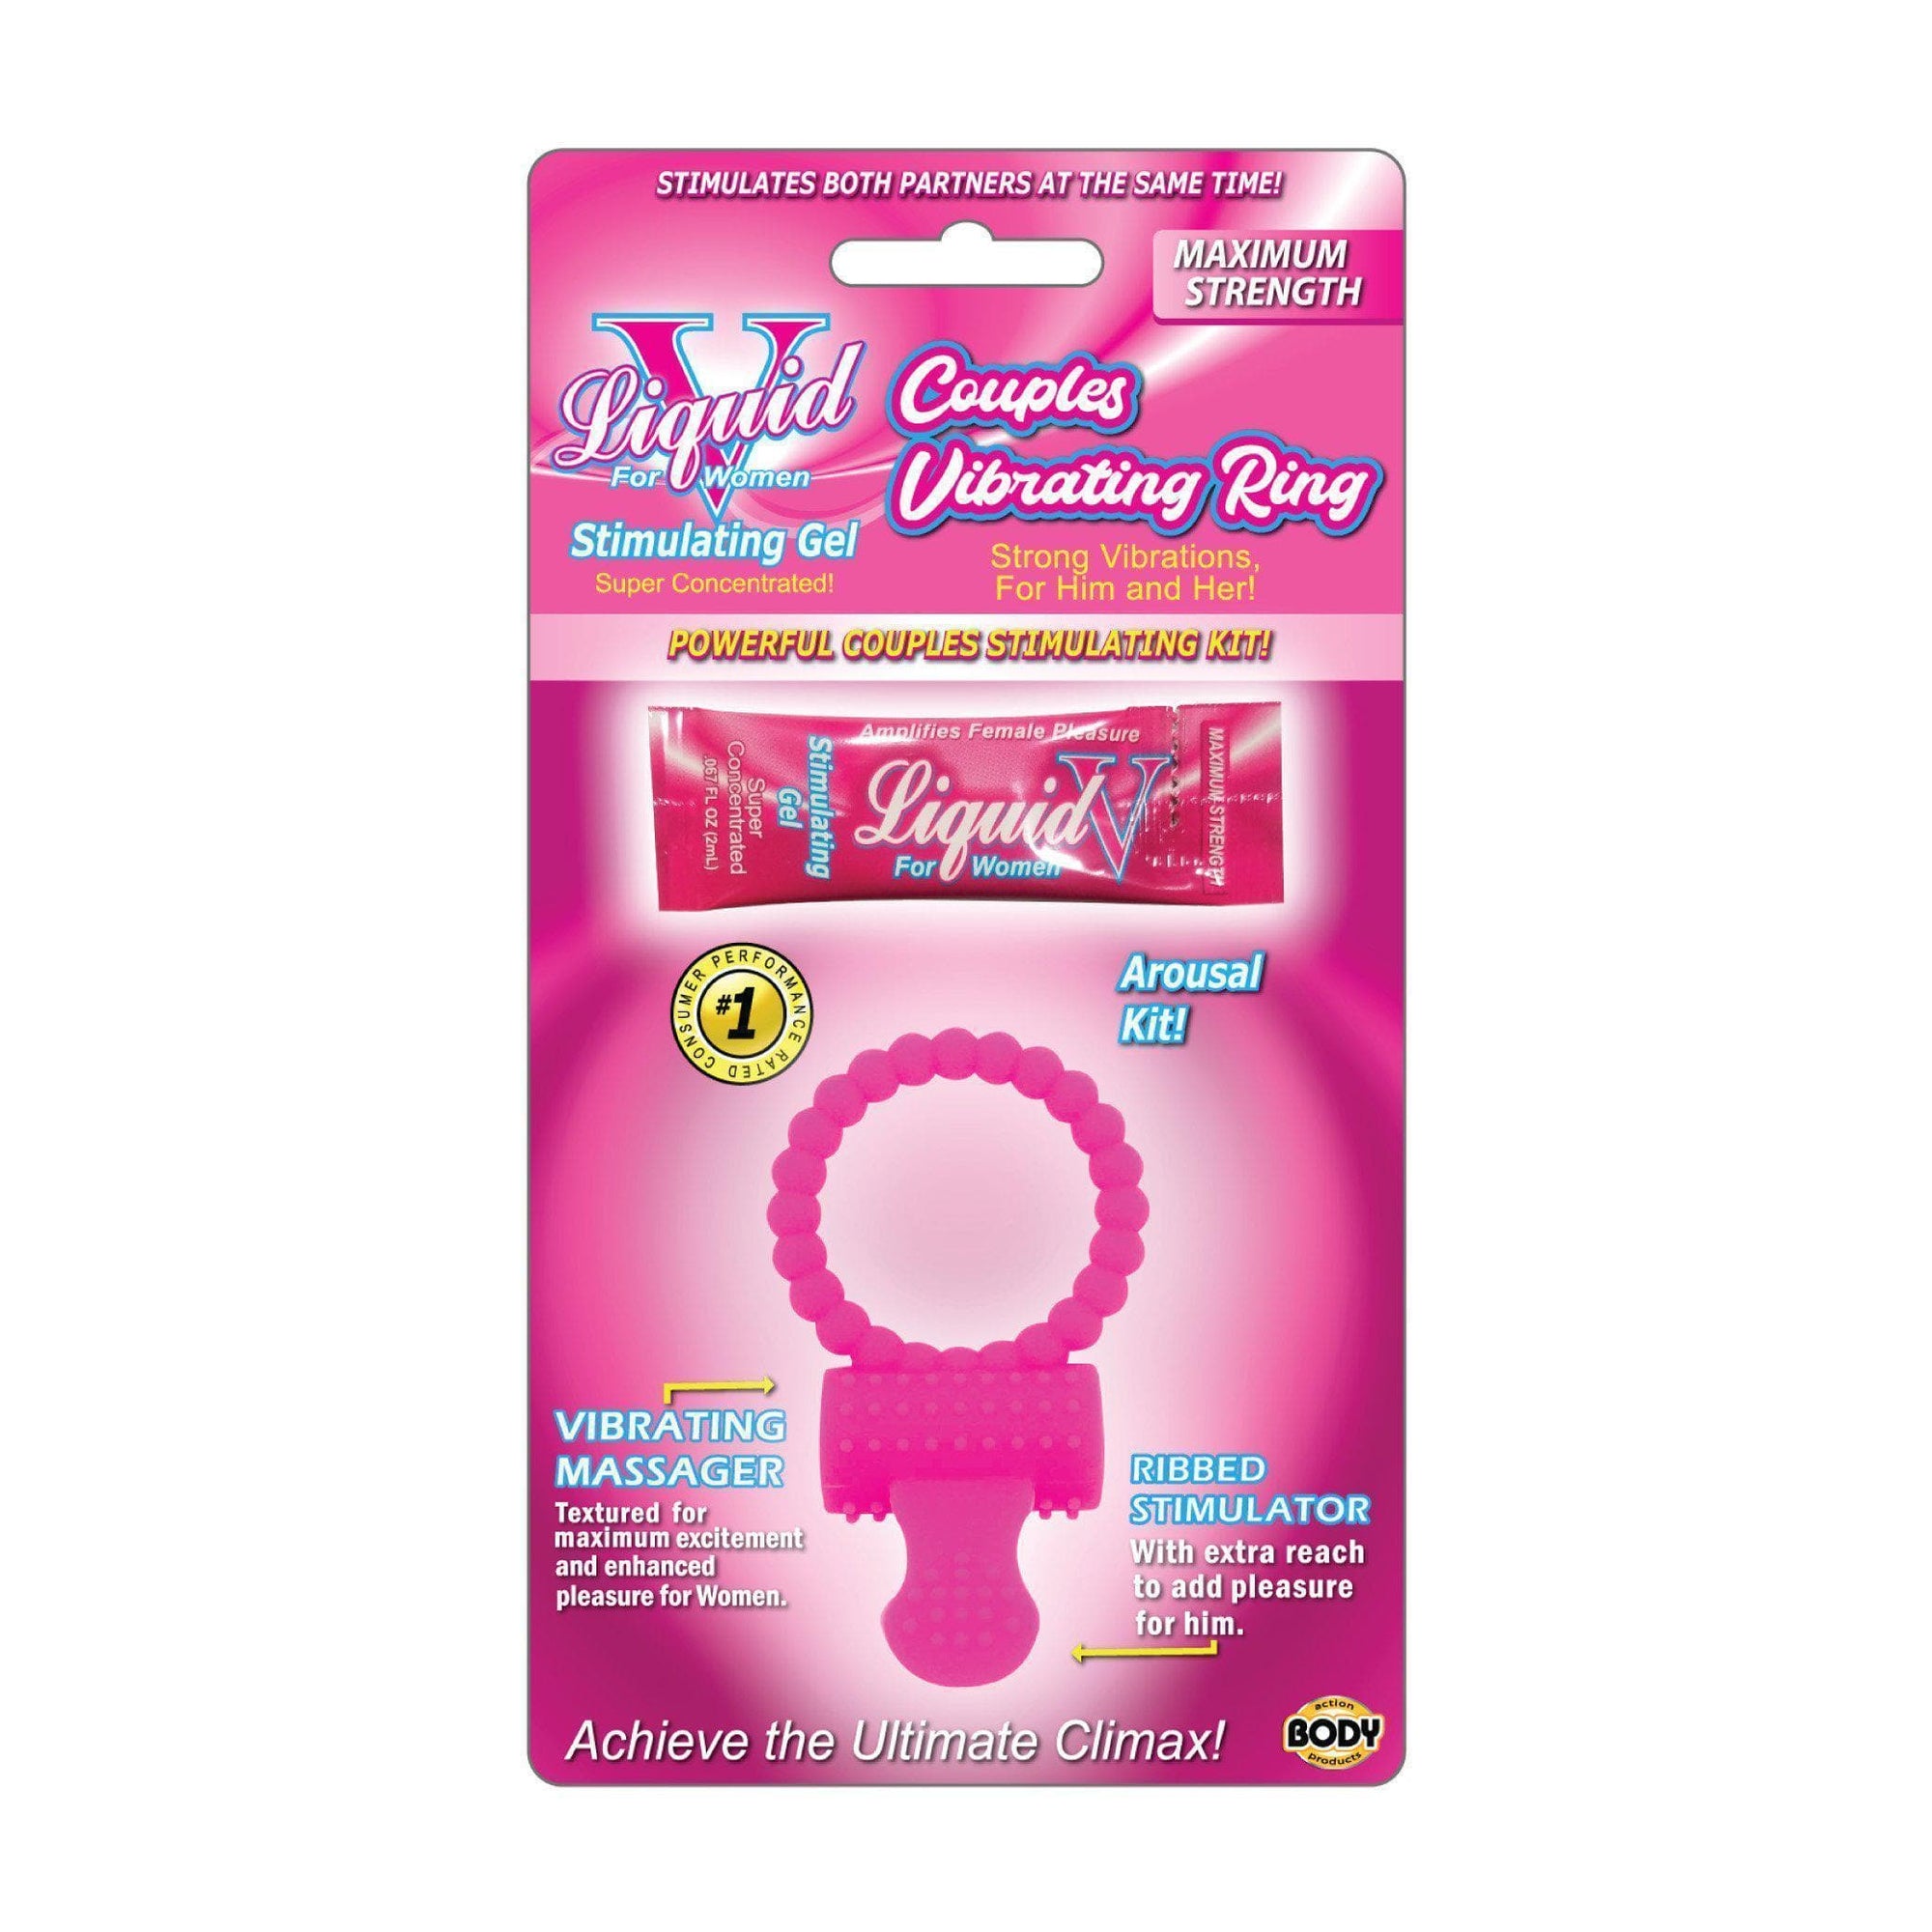 Liquid V Couples Ribbed Vibrating Ring Kit with Maximum Strength Clitoral Stimulating Gel - Romantic Blessings